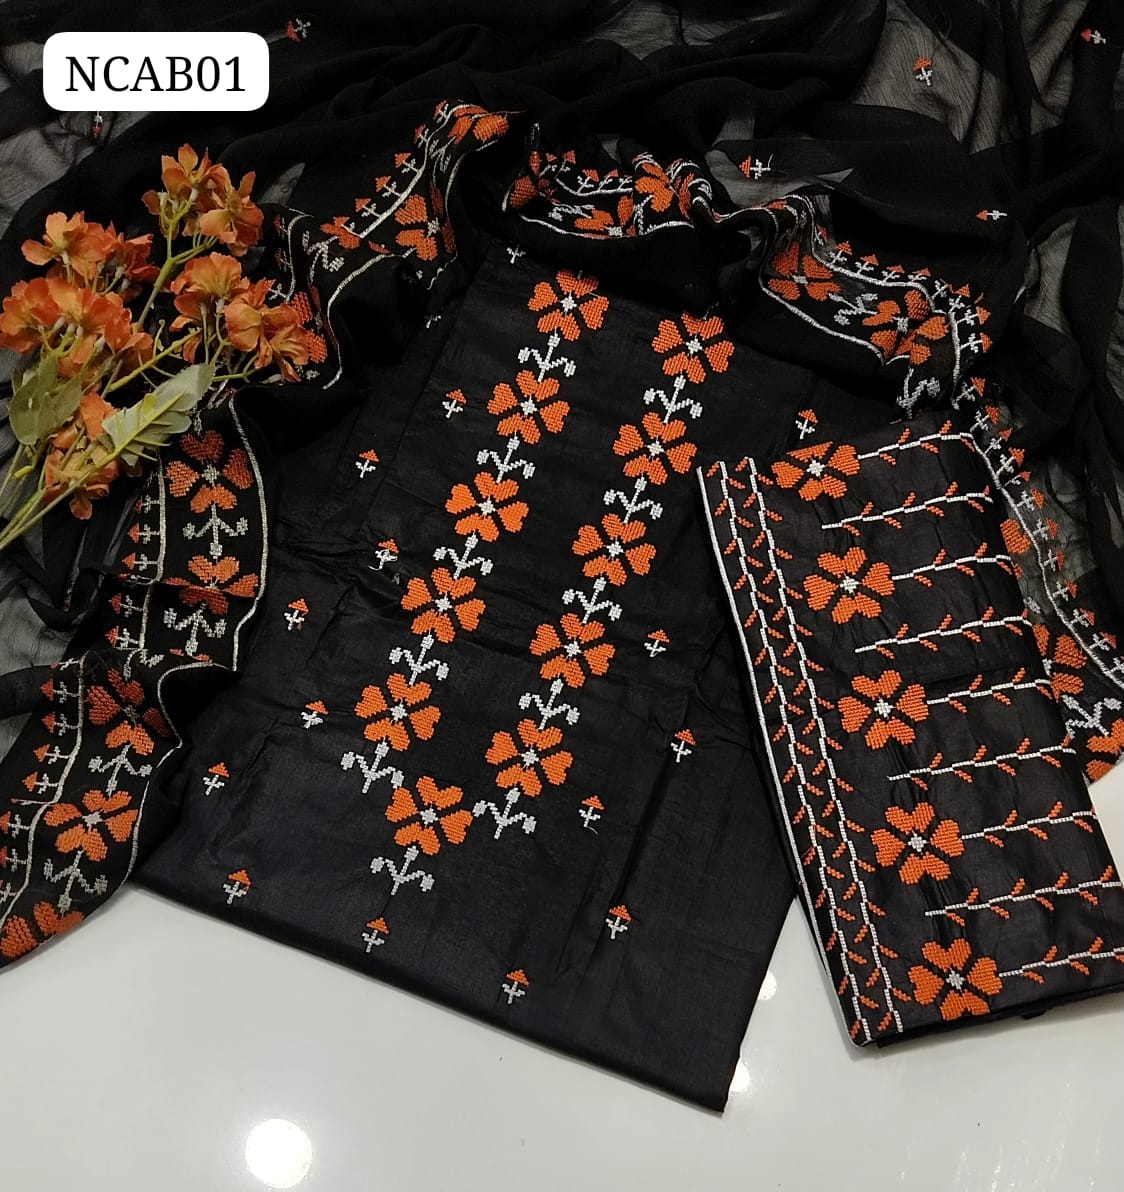 Cotton Fabric Cross Stitch & 9mm Embroidery Work Shirt And Embroidery Trouser Along With Contras Chiffon Karinkal Embroidery Duppata 3 Pc Dress